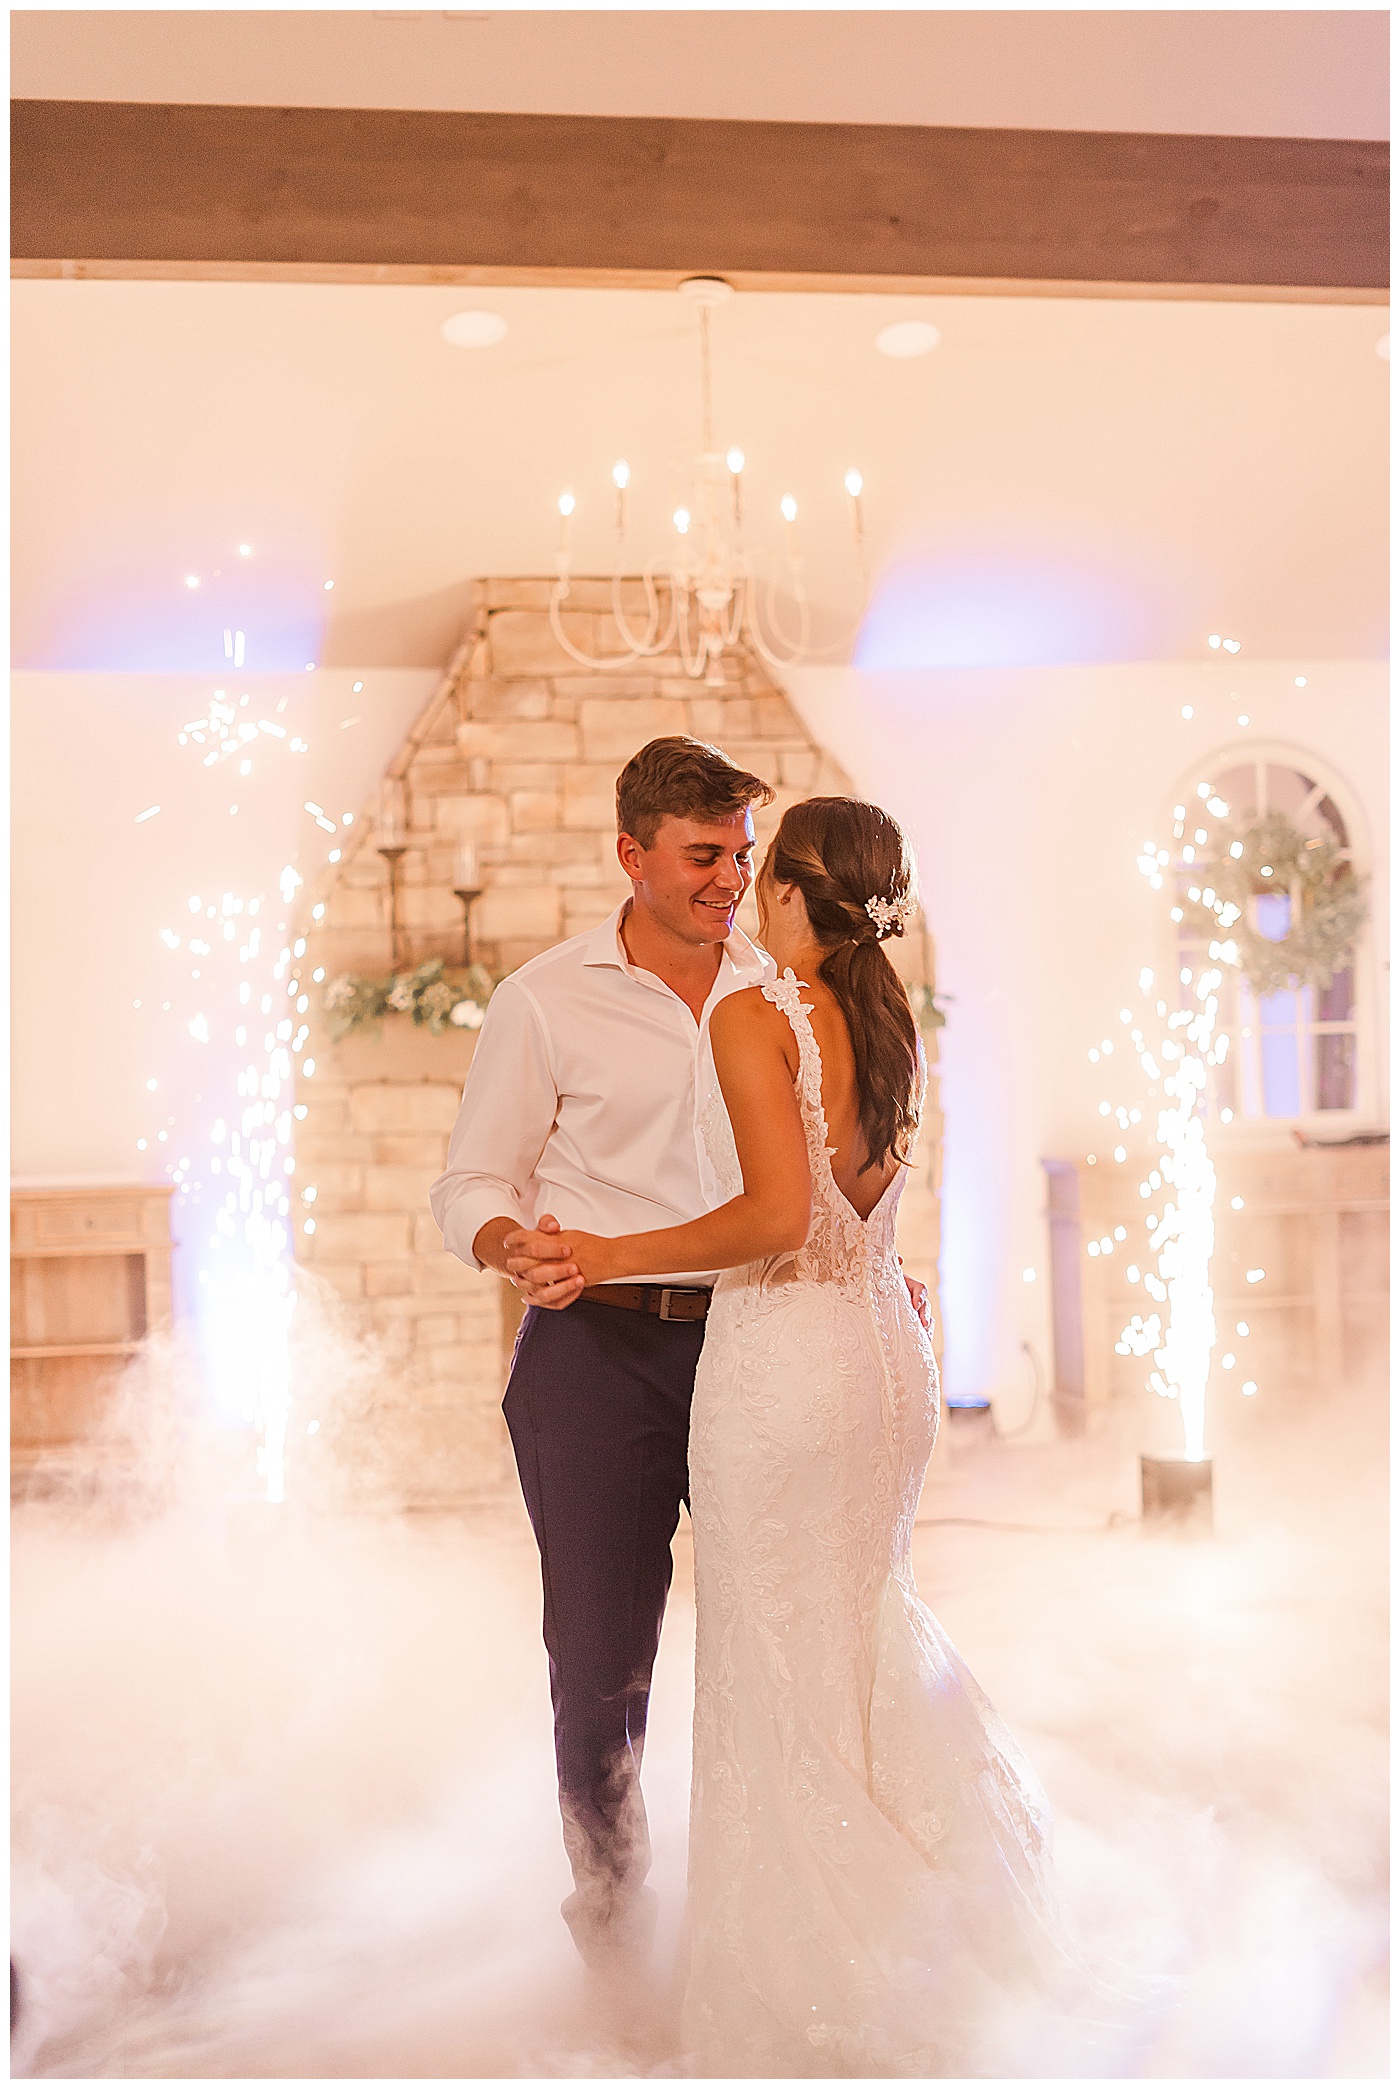 First Dance with sparklers 